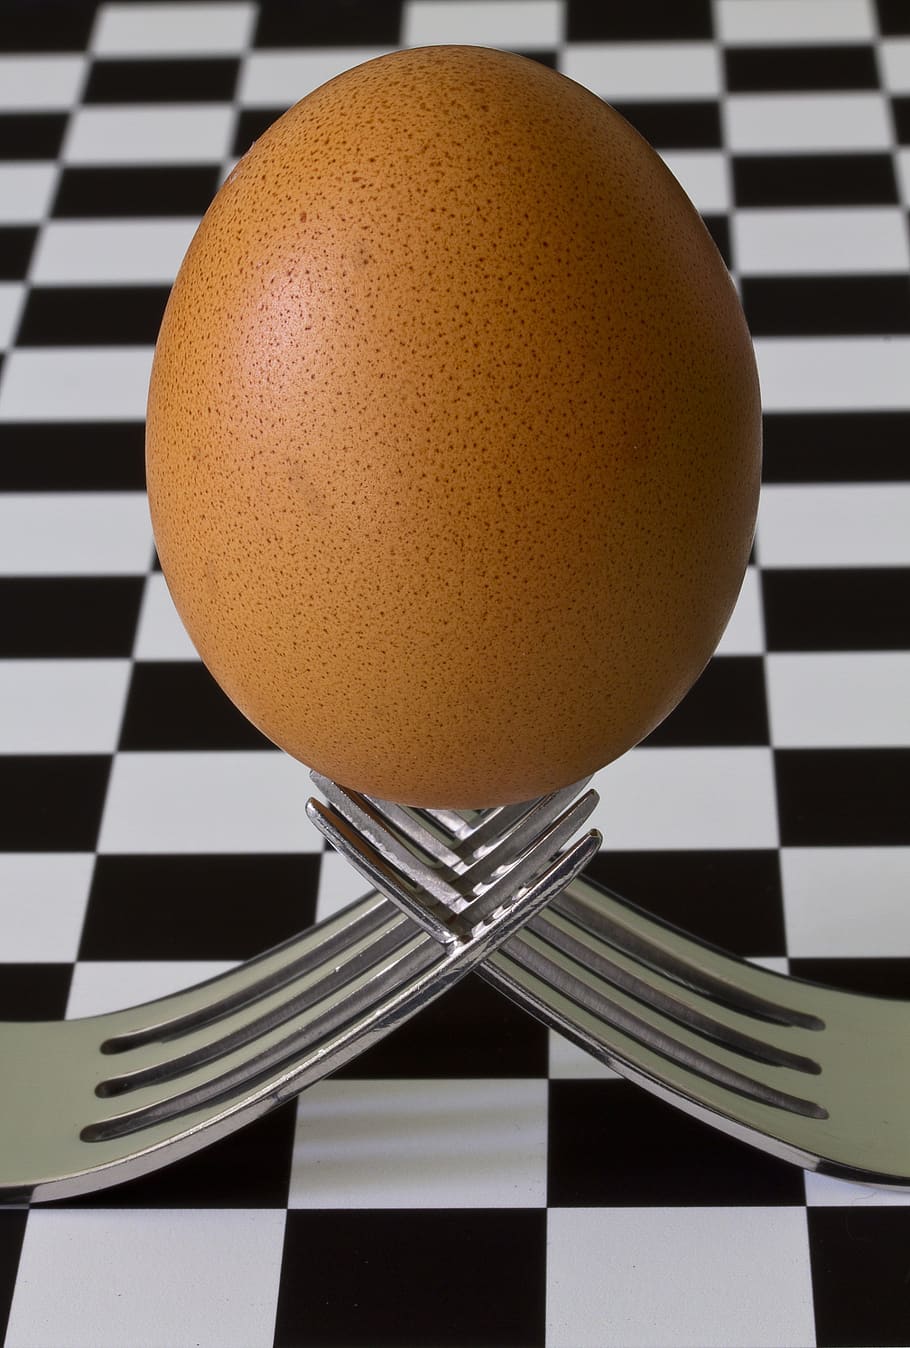 still, items, things, forks, egg, balance, equilibrium, checkered, table, photography